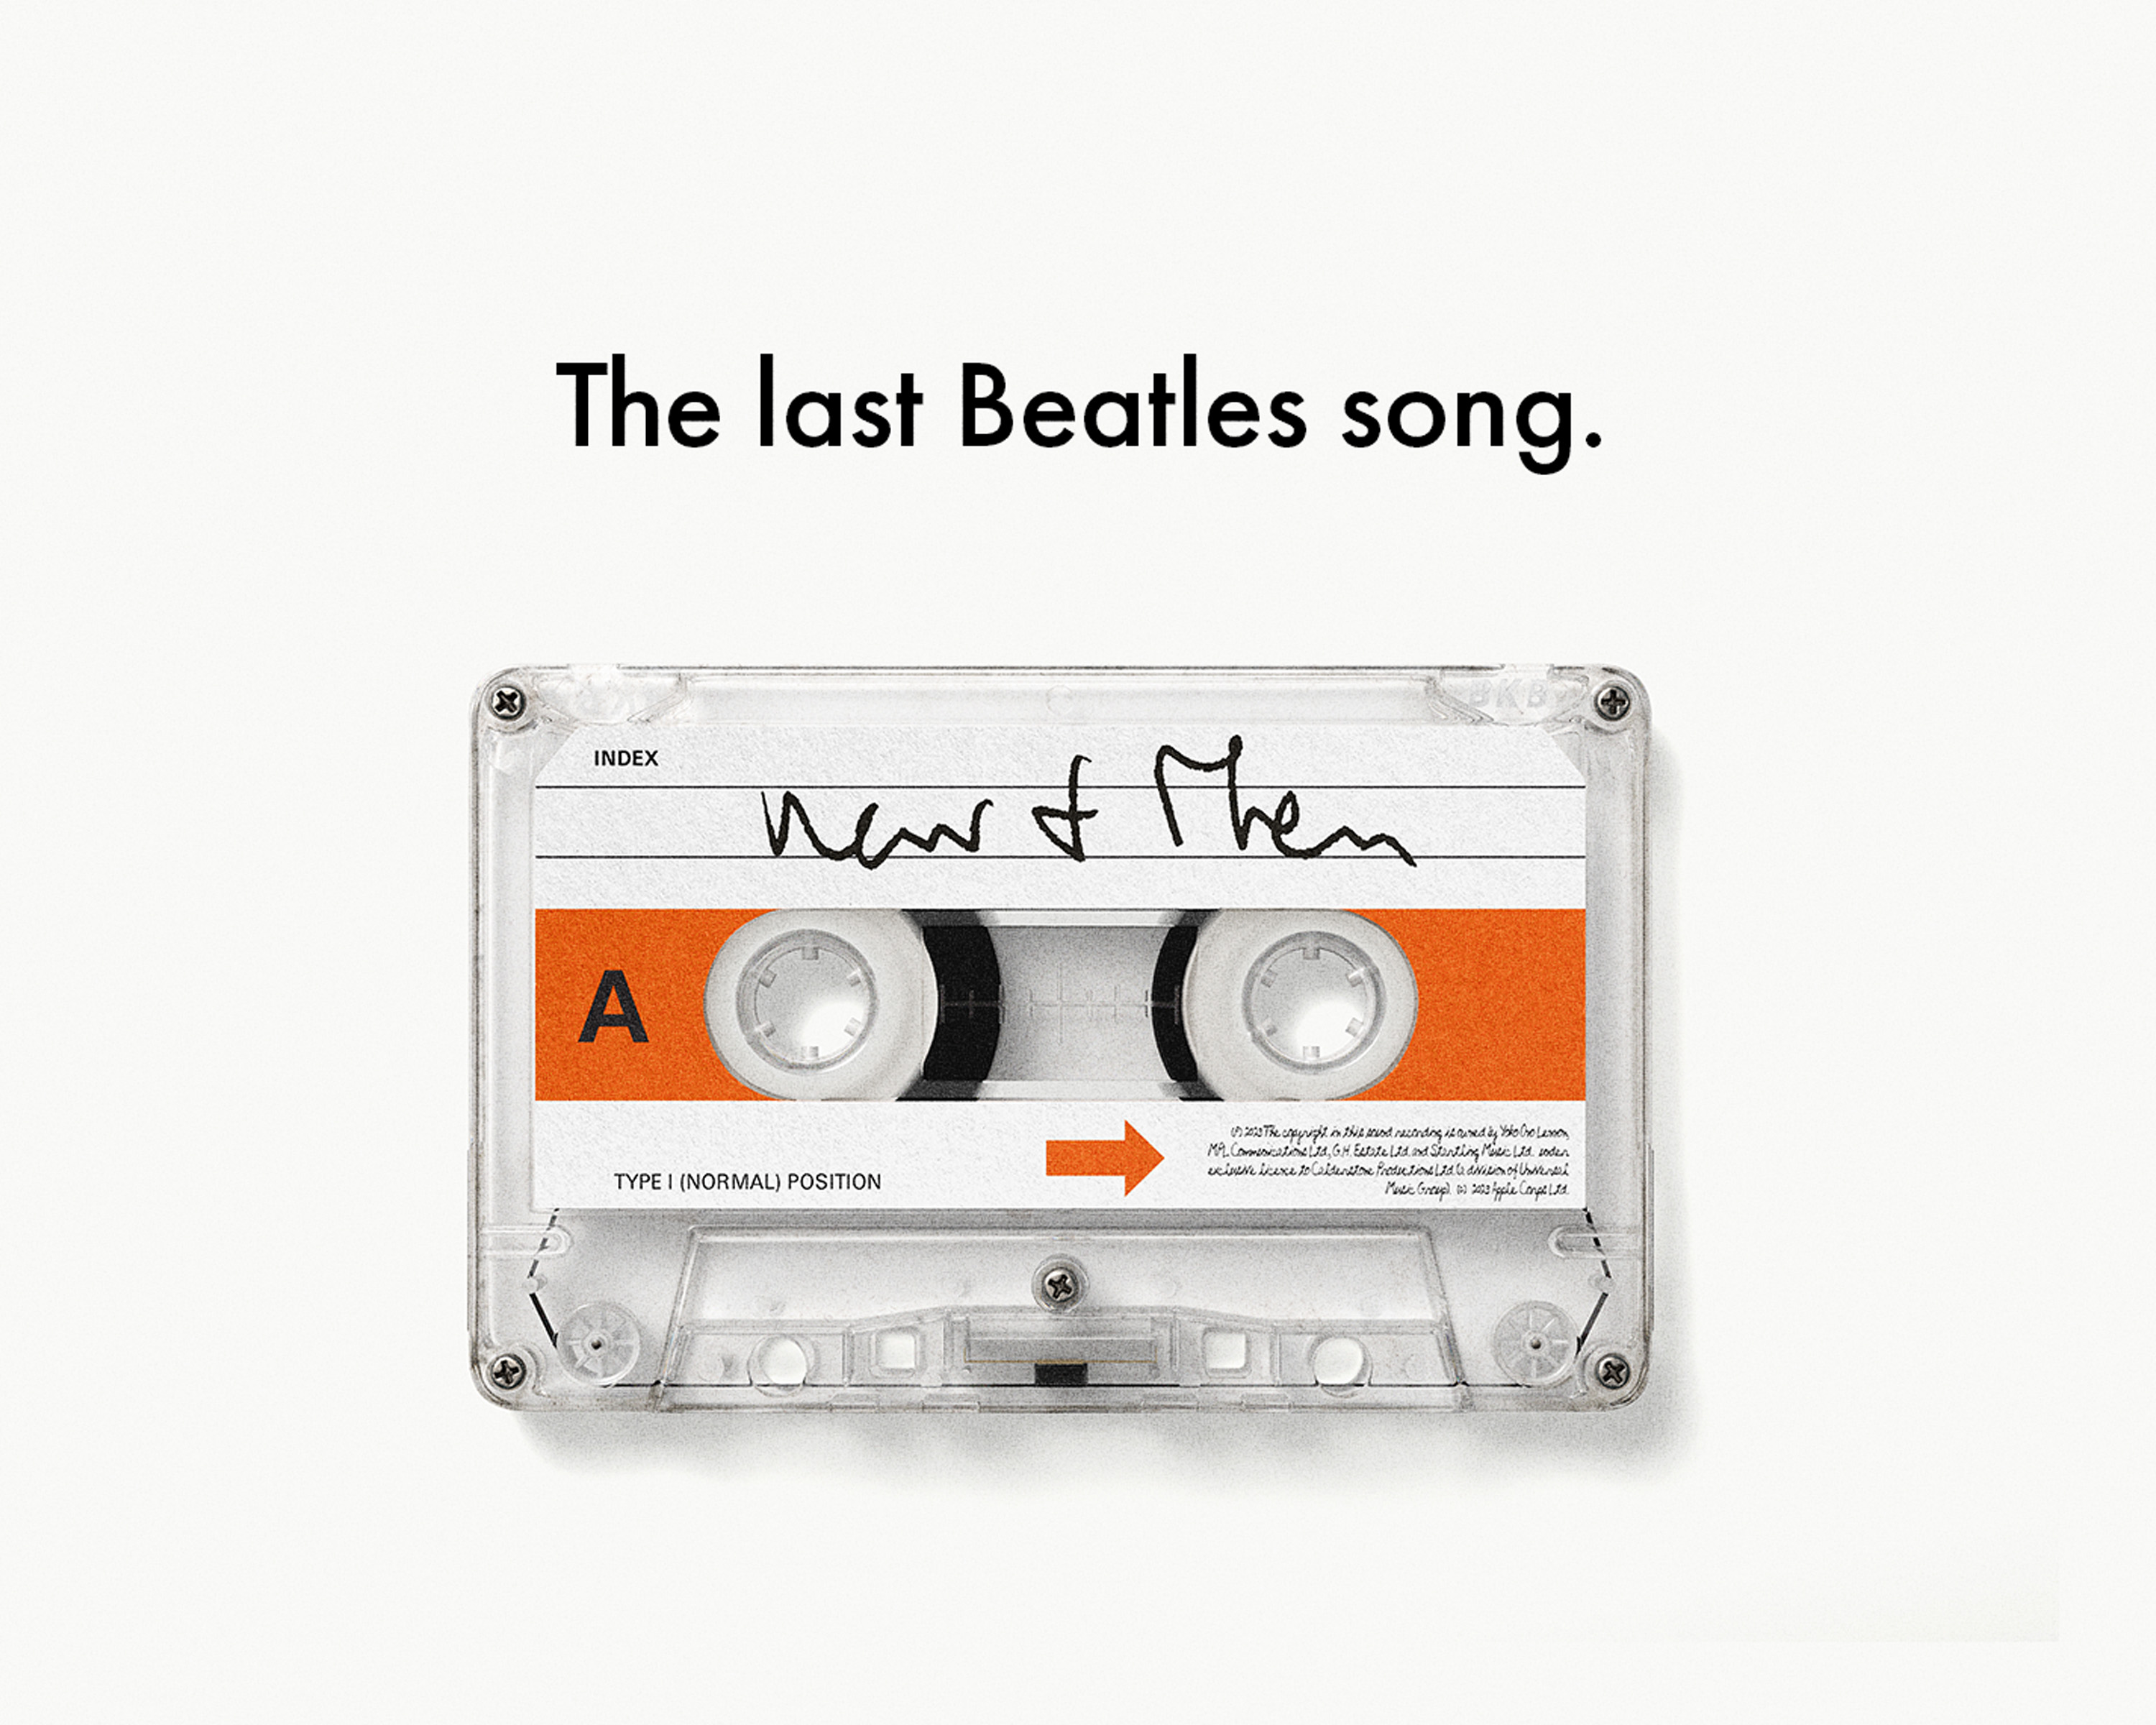 The Beatles – Now and Then Lyrics